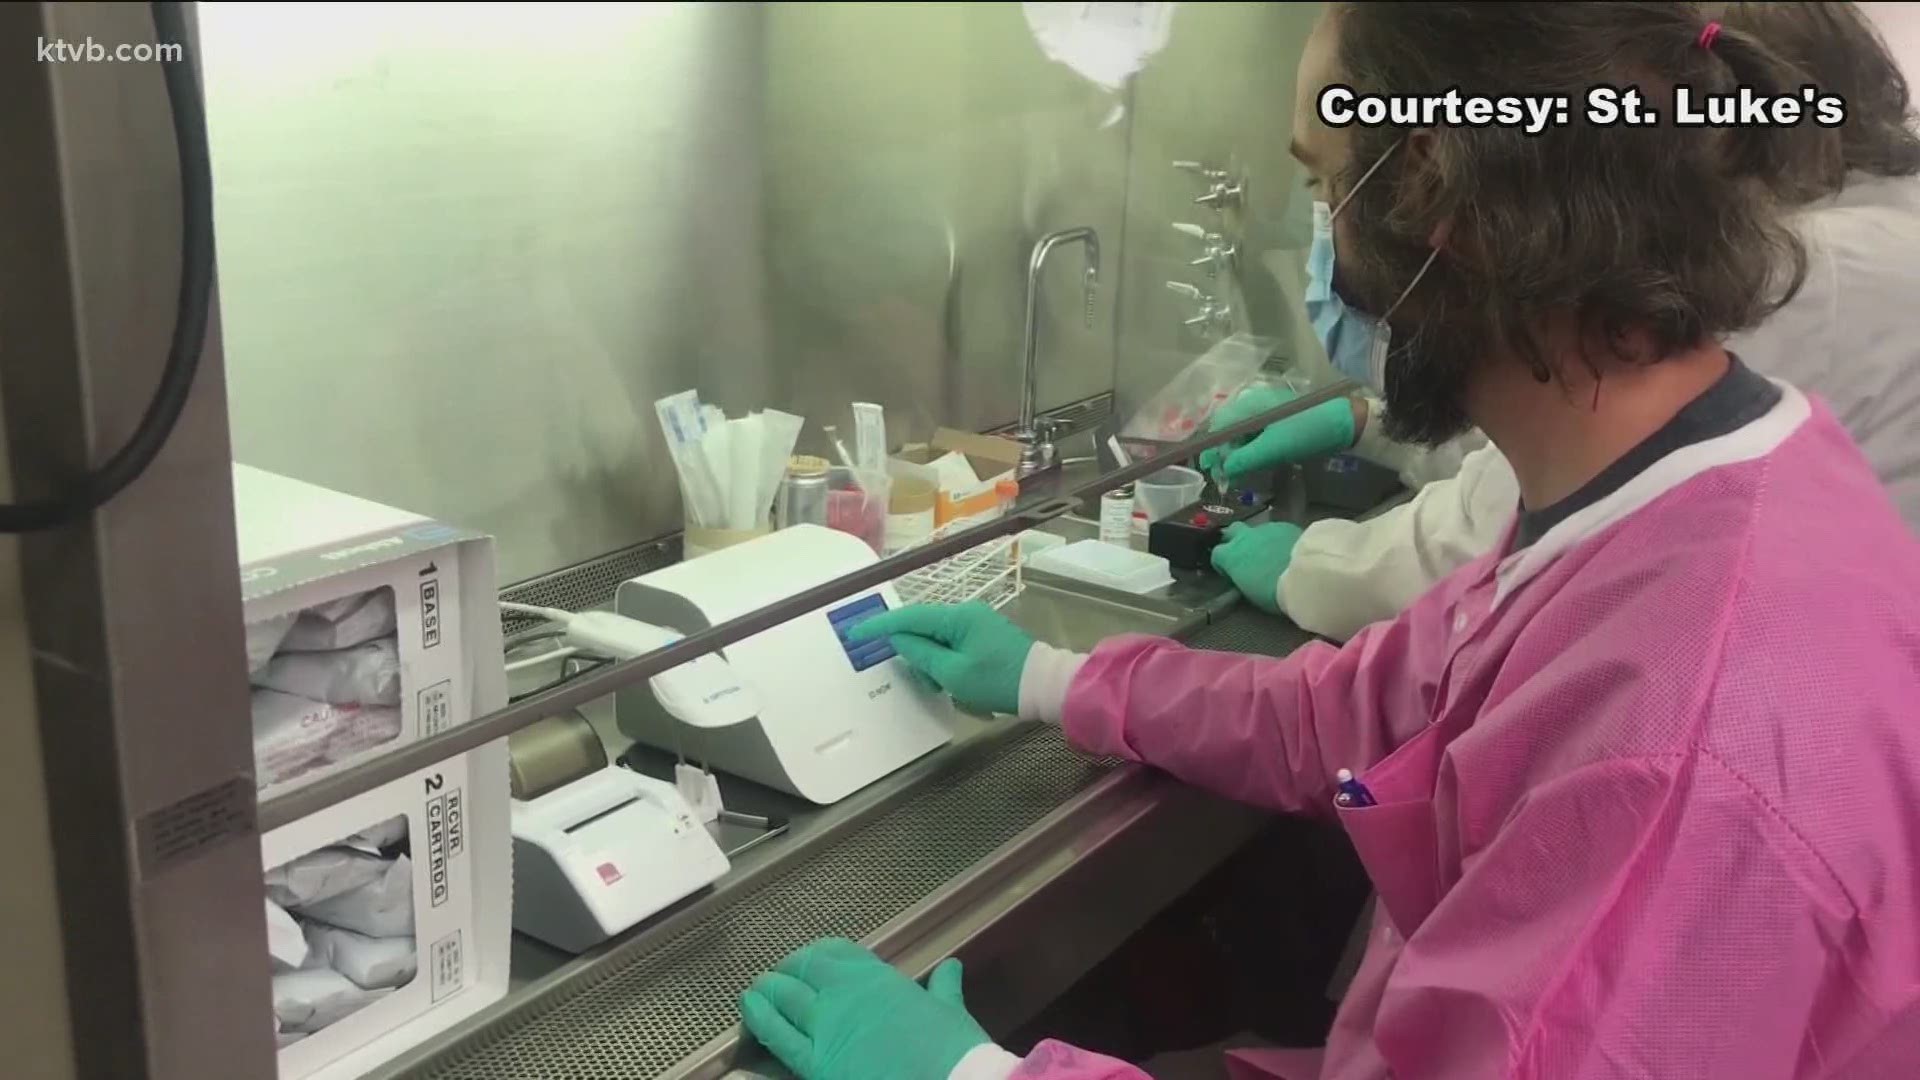 Idaho is just one of many states experiencing a shortage of coronavirus tests.